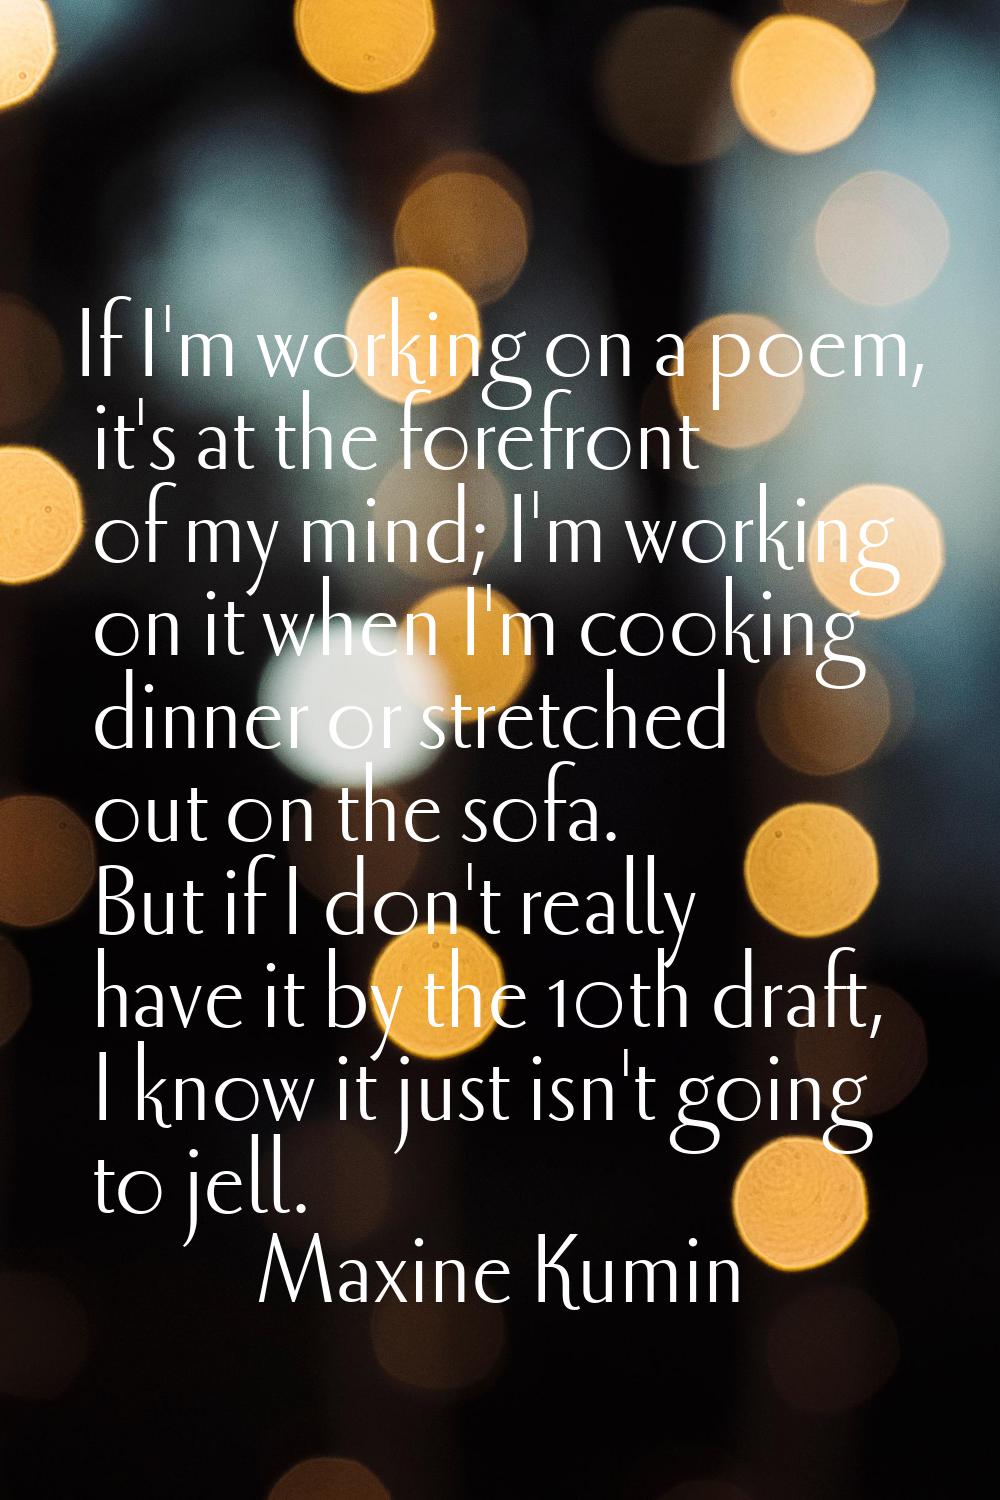 If I'm working on a poem, it's at the forefront of my mind; I'm working on it when I'm cooking dinn